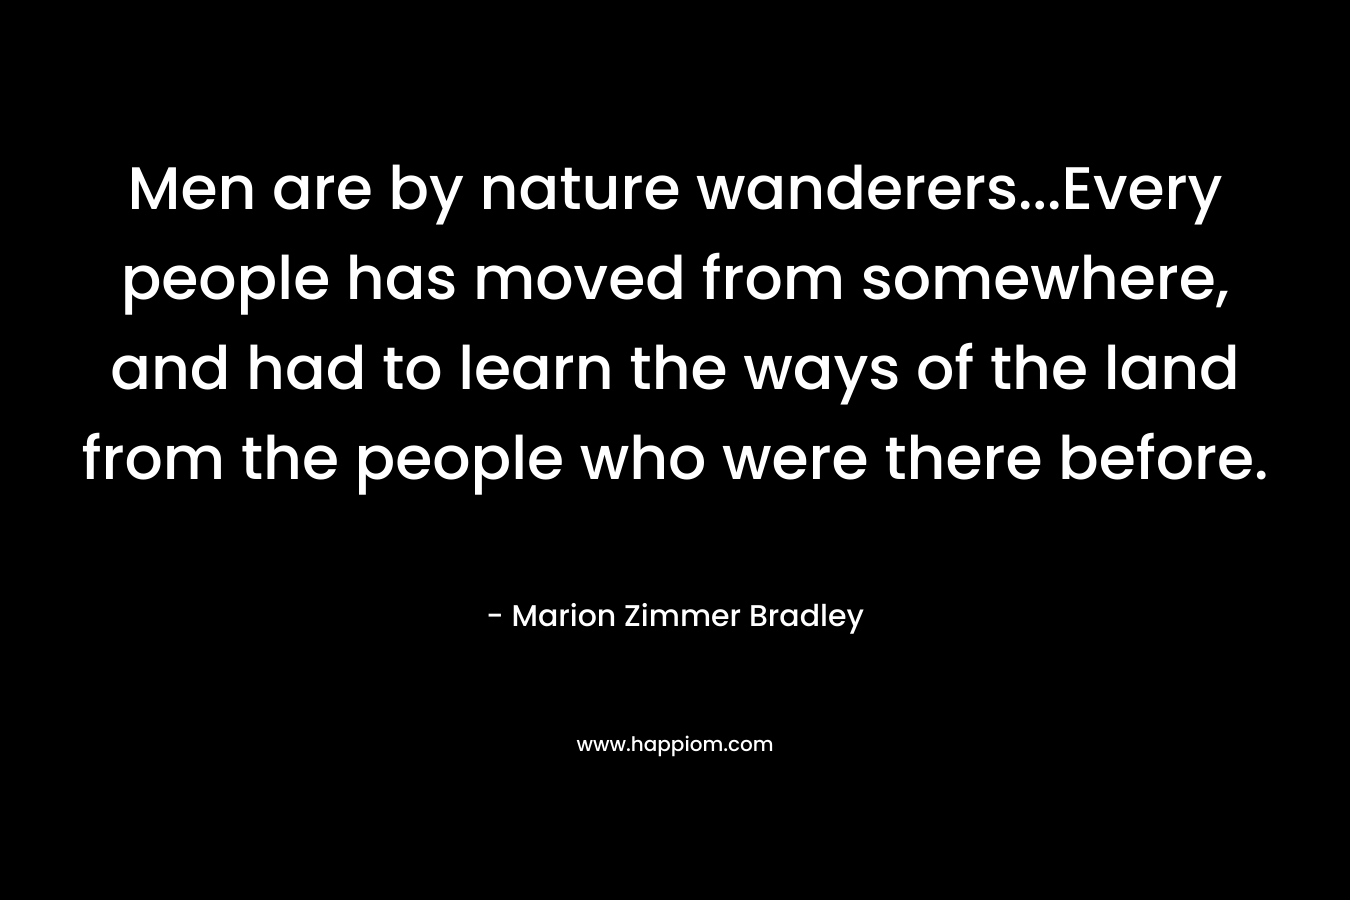 Men are by nature wanderers...Every people has moved from somewhere, and had to learn the ways of the land from the people who were there before.